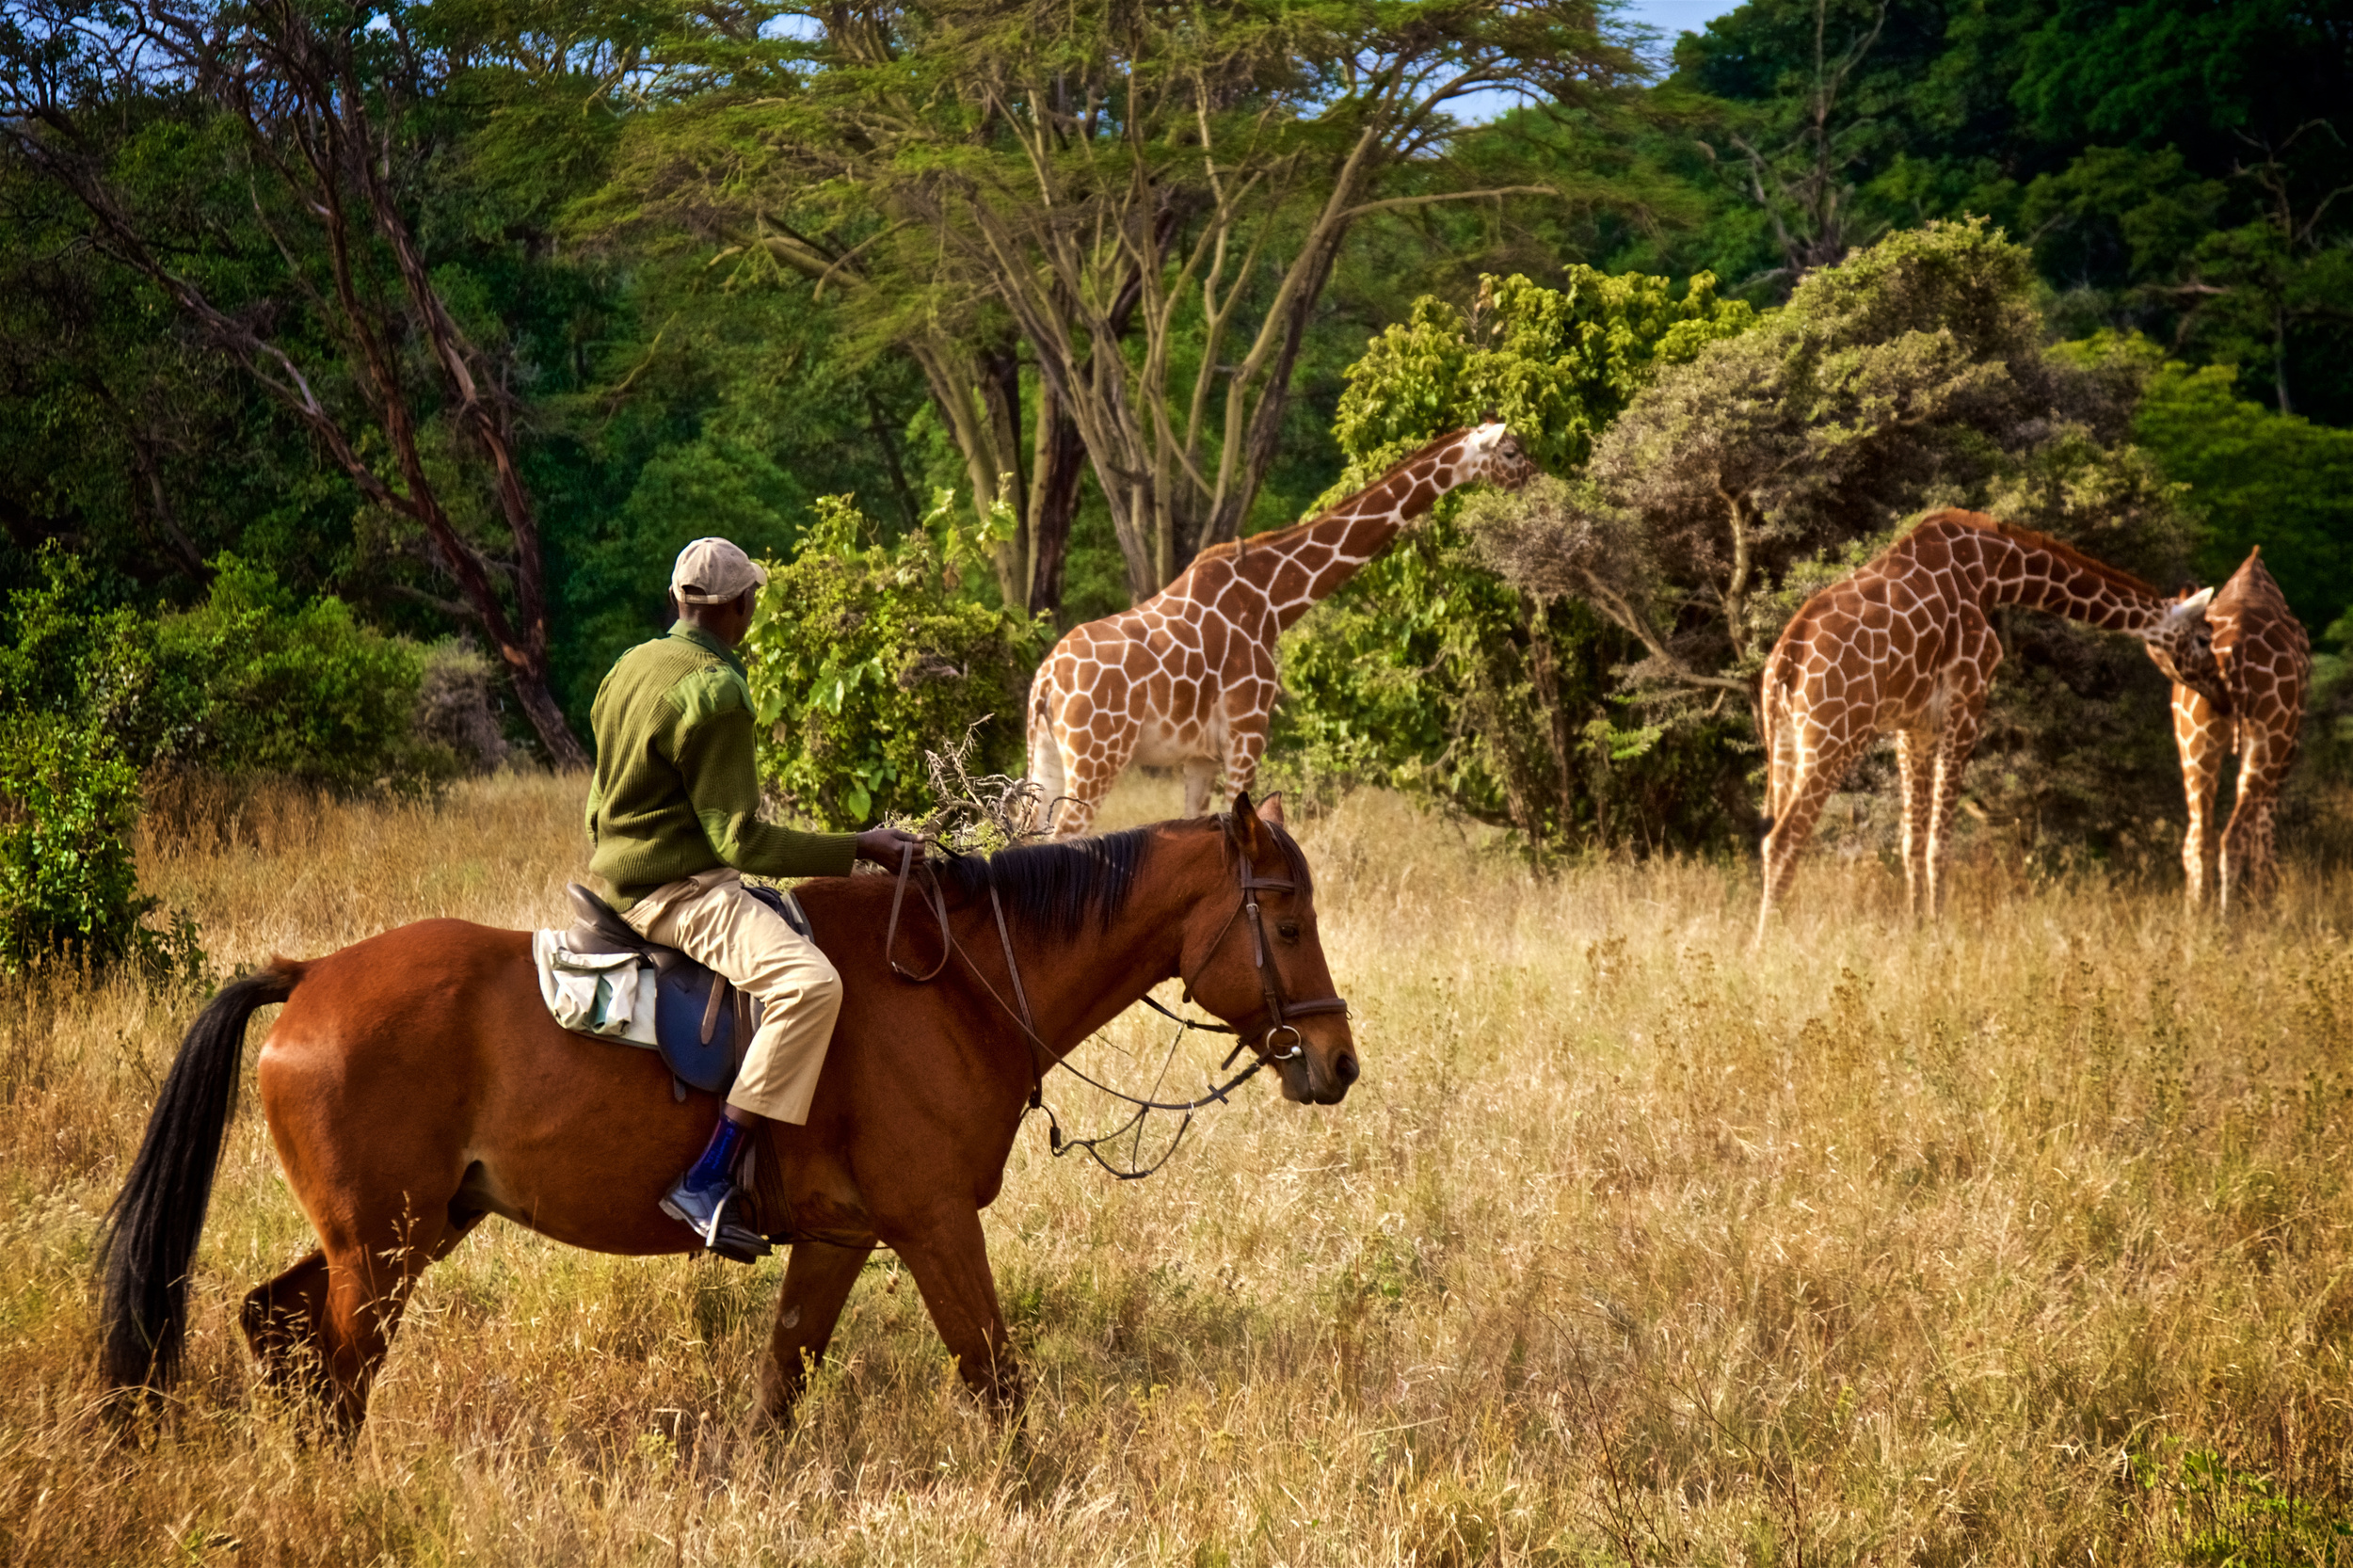 <p>Kenya is synonymous with safari. And while it’s exciting to roll around in a jeep spotting lions, cheetahs, and rhinos (oh my), one of the more unique experiences is to do so on horseback. </p><p>You may also like: <a href='https://www.yardbarker.com/lifestyle/articles/21_things_you_didnt_know_about_dunkin_040824/s1__38893501'>21 things you didn’t know about Dunkin’</a></p>